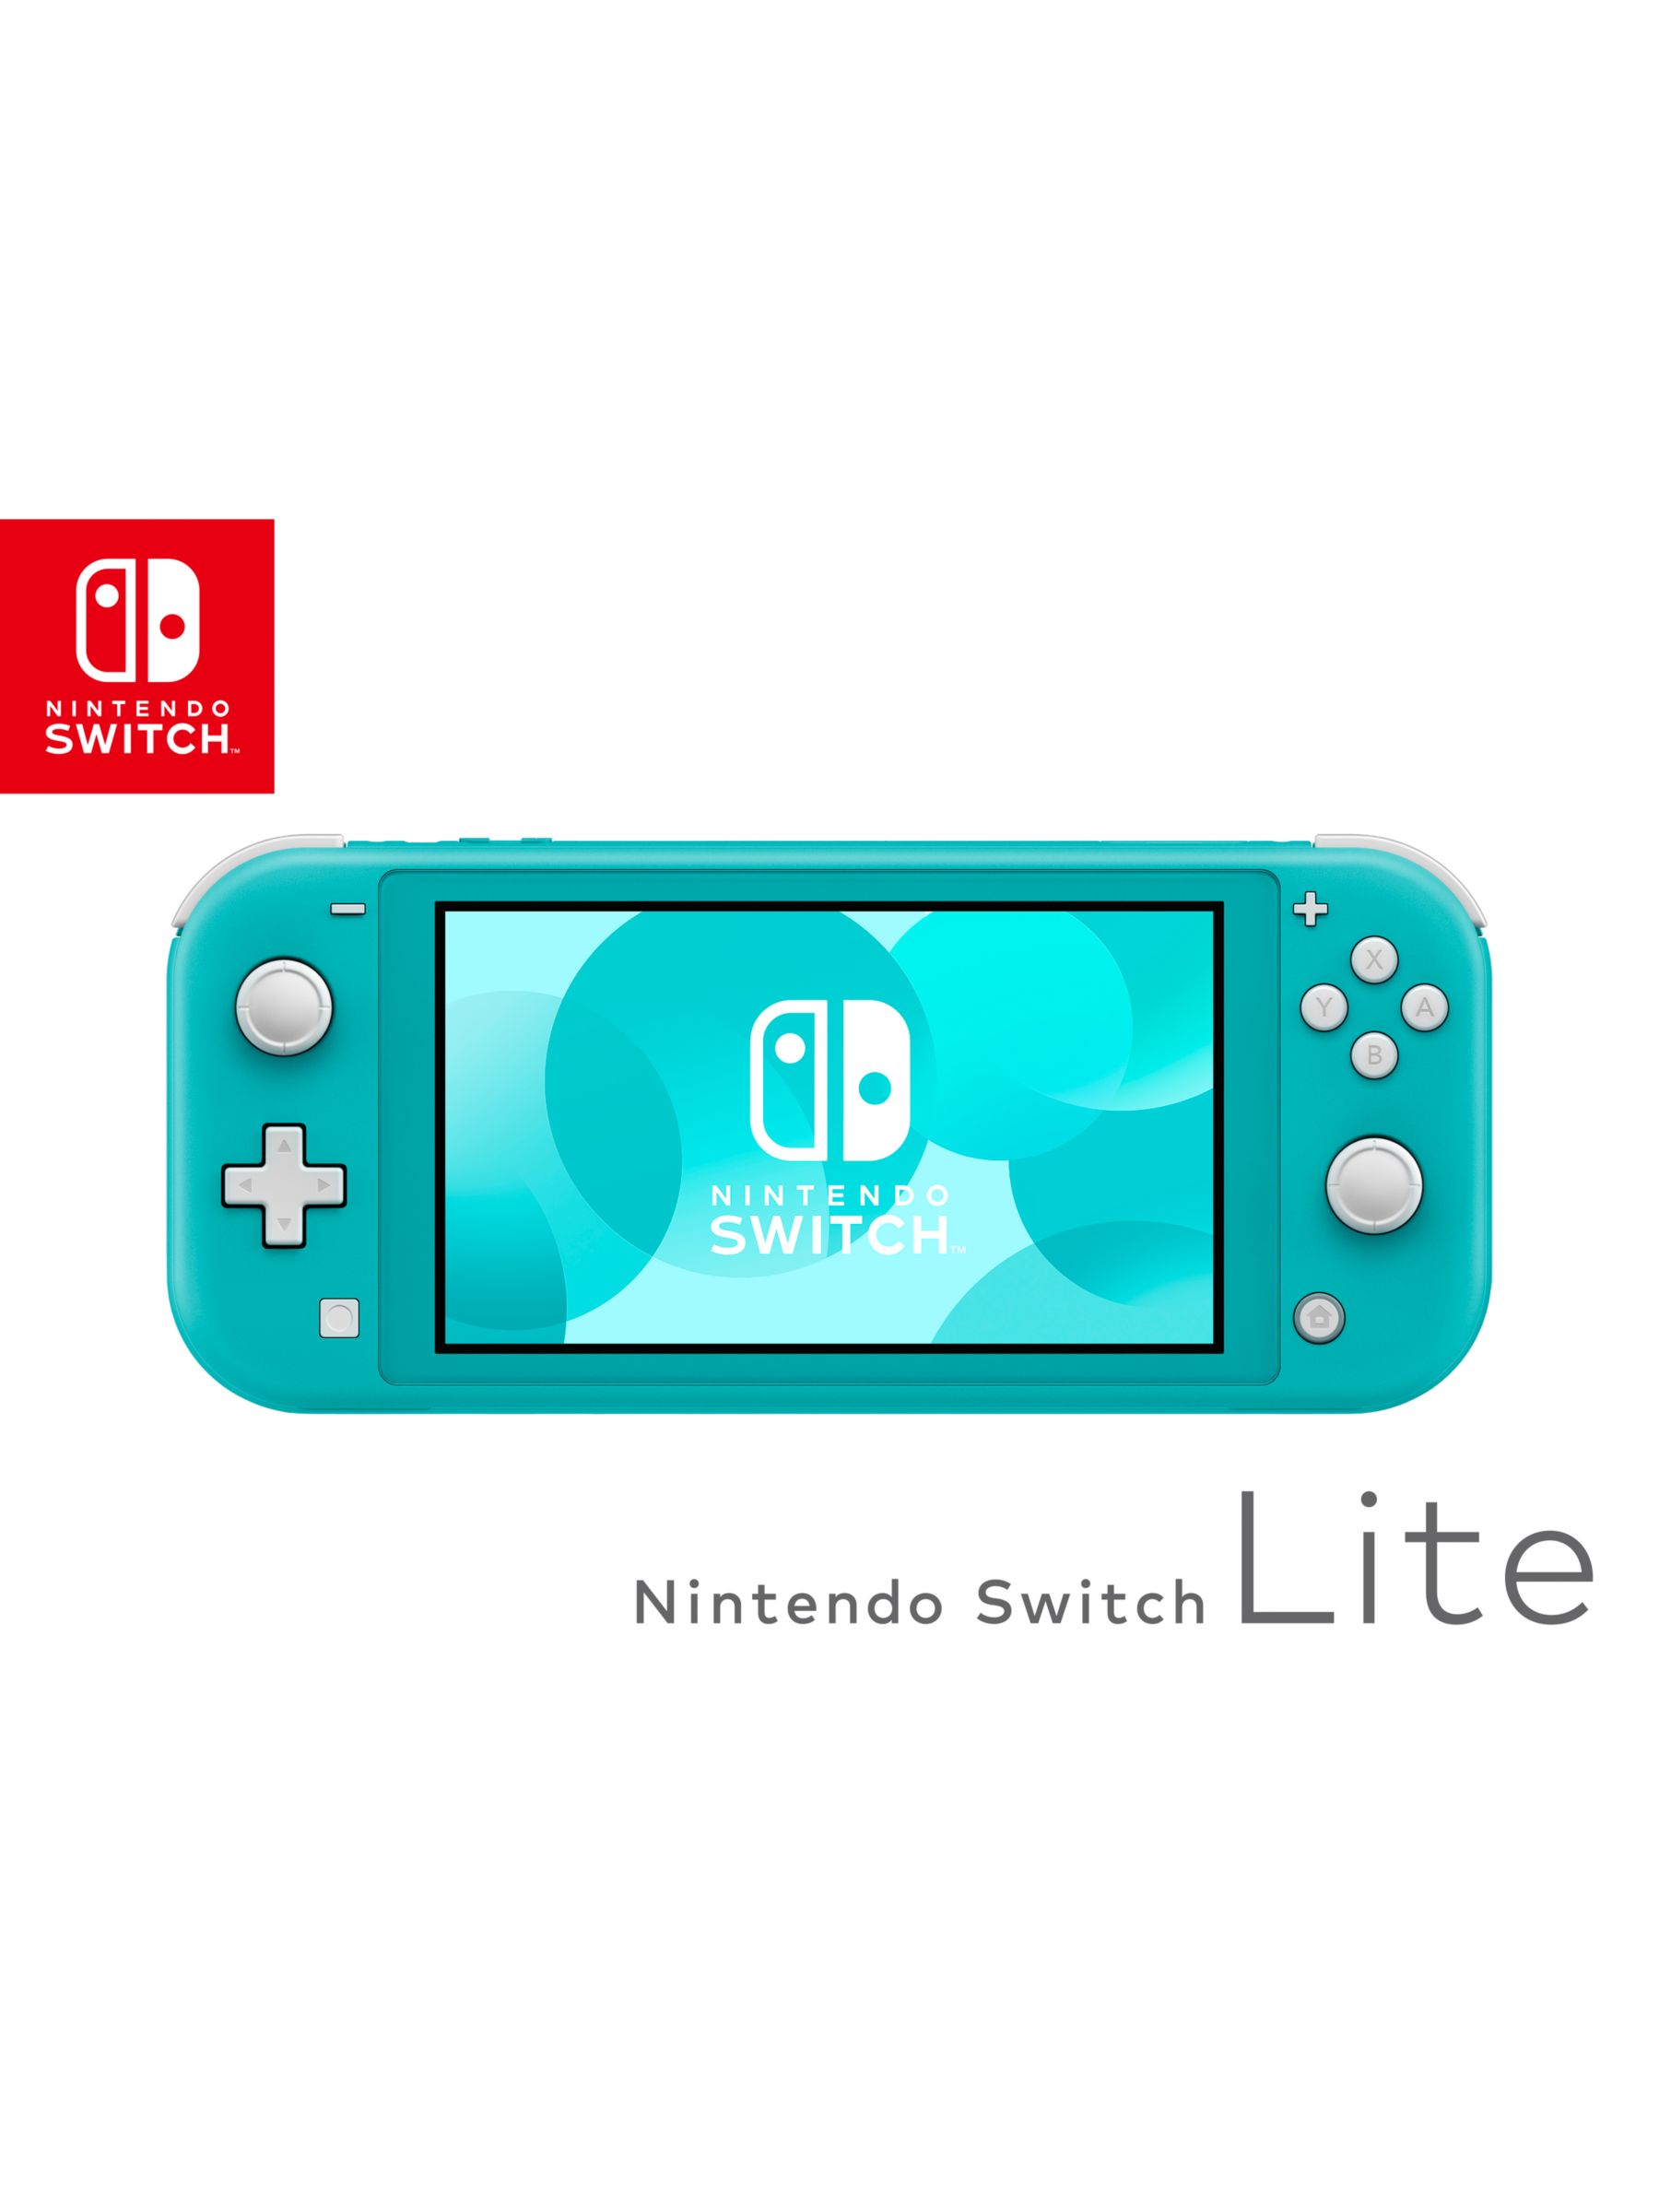 what can nintendo switch lite do